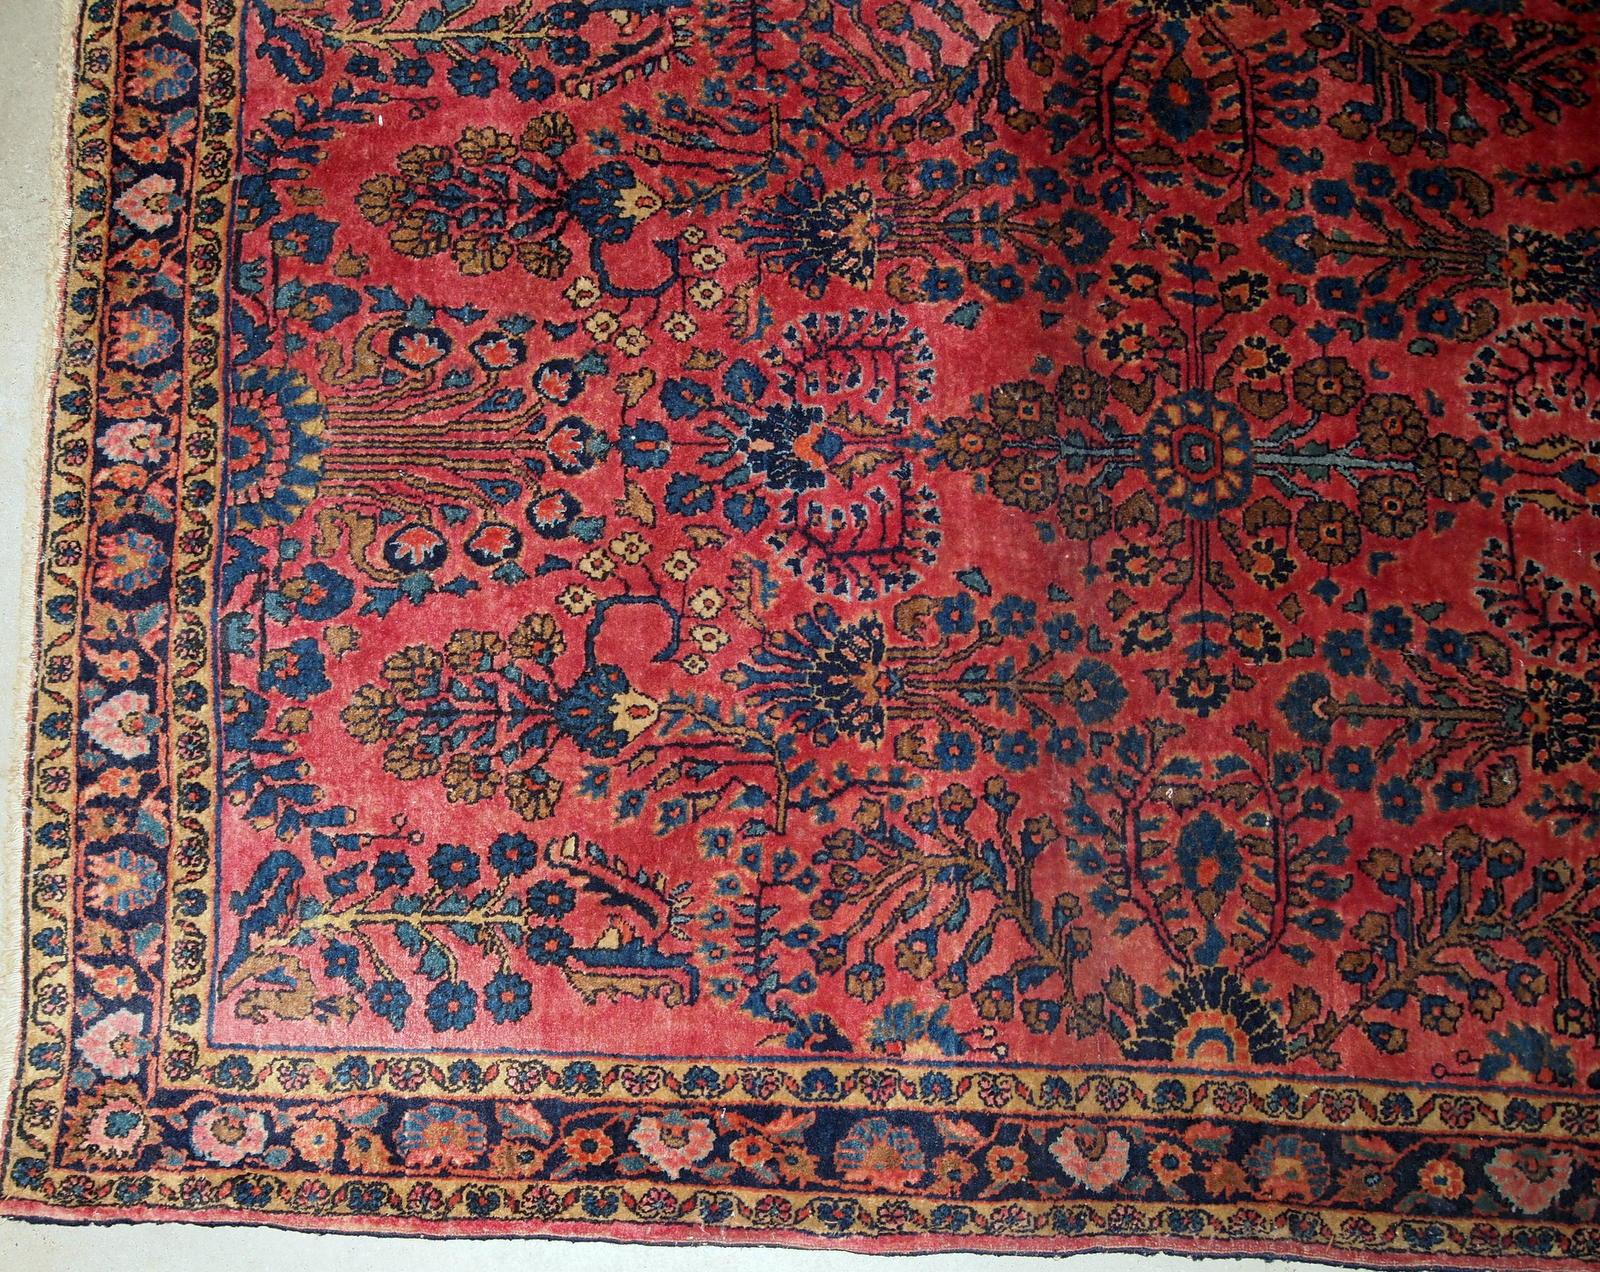 Hand-weaved antique Sarouk rug from the beginning of 20th century. The rug is in original good condition.

- Condition: original good,

- circa 1920s

- Size: 3.7' x 5.4' (112cm x 164cm),

- Material: wool

- Country of origin: Middle